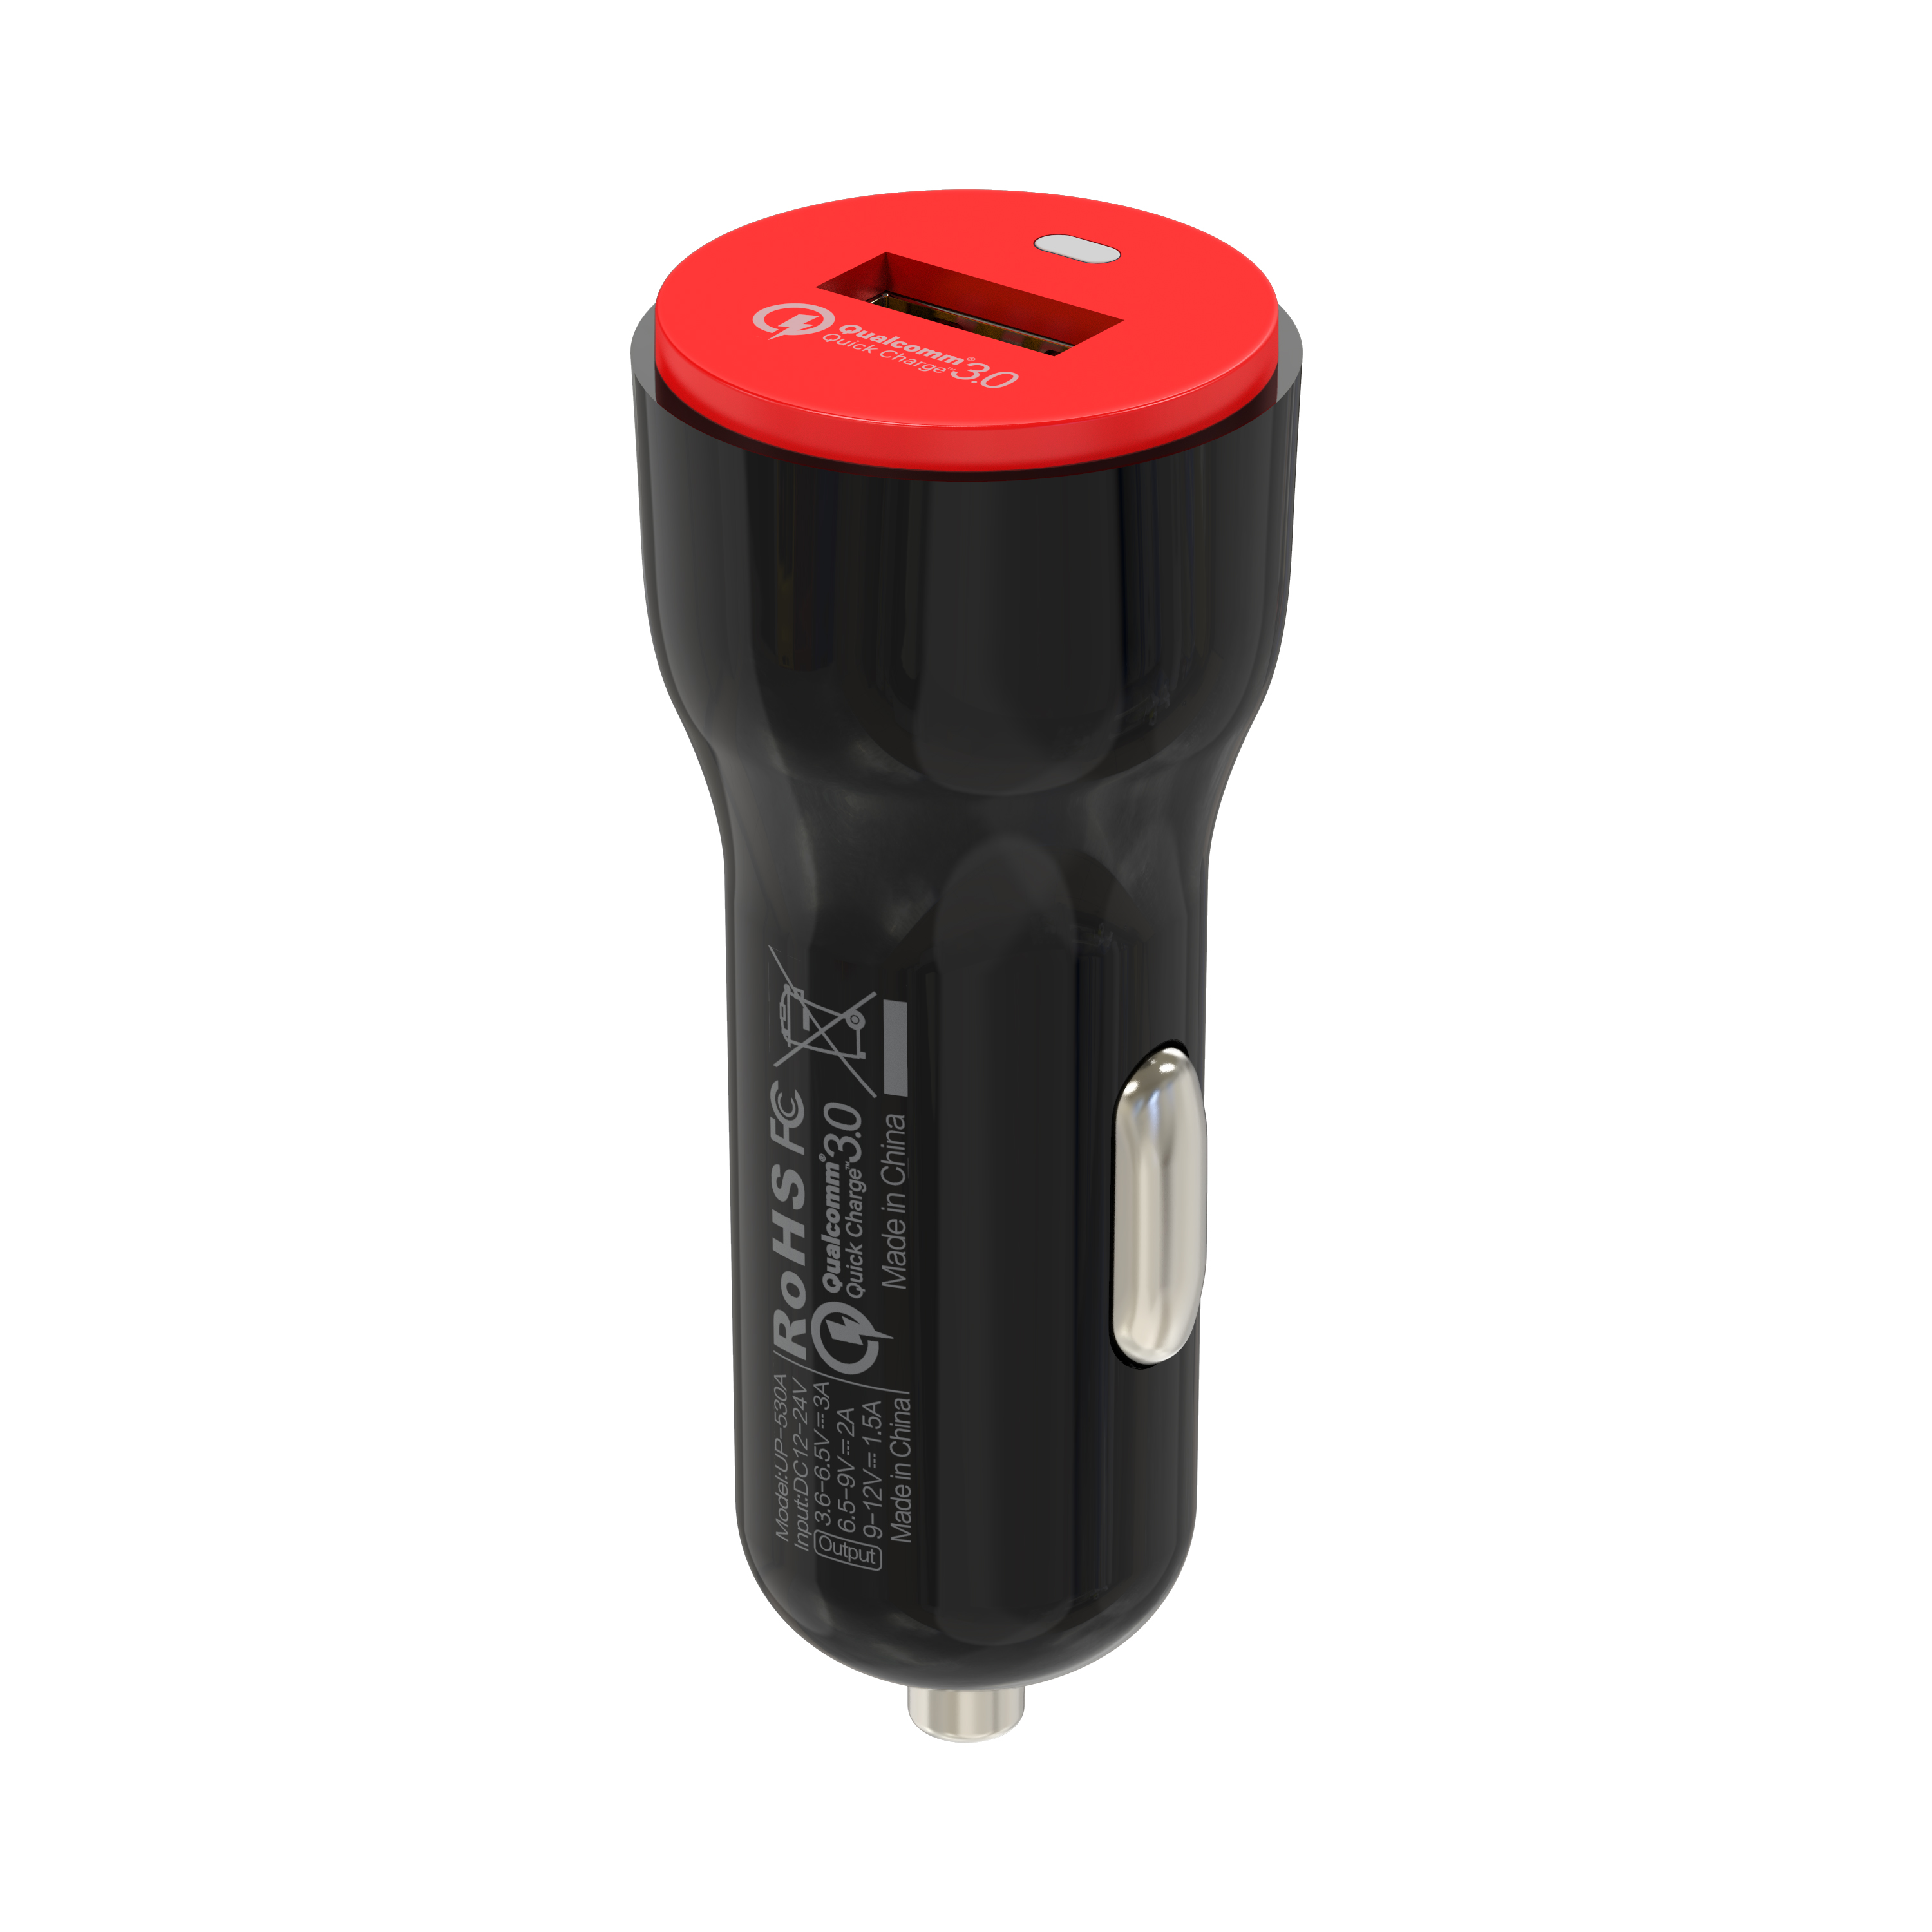 Single-port 2.4a car charger Manufacturers, Single-port 2.4a car charger Factory, Supply Single-port 2.4a car charger